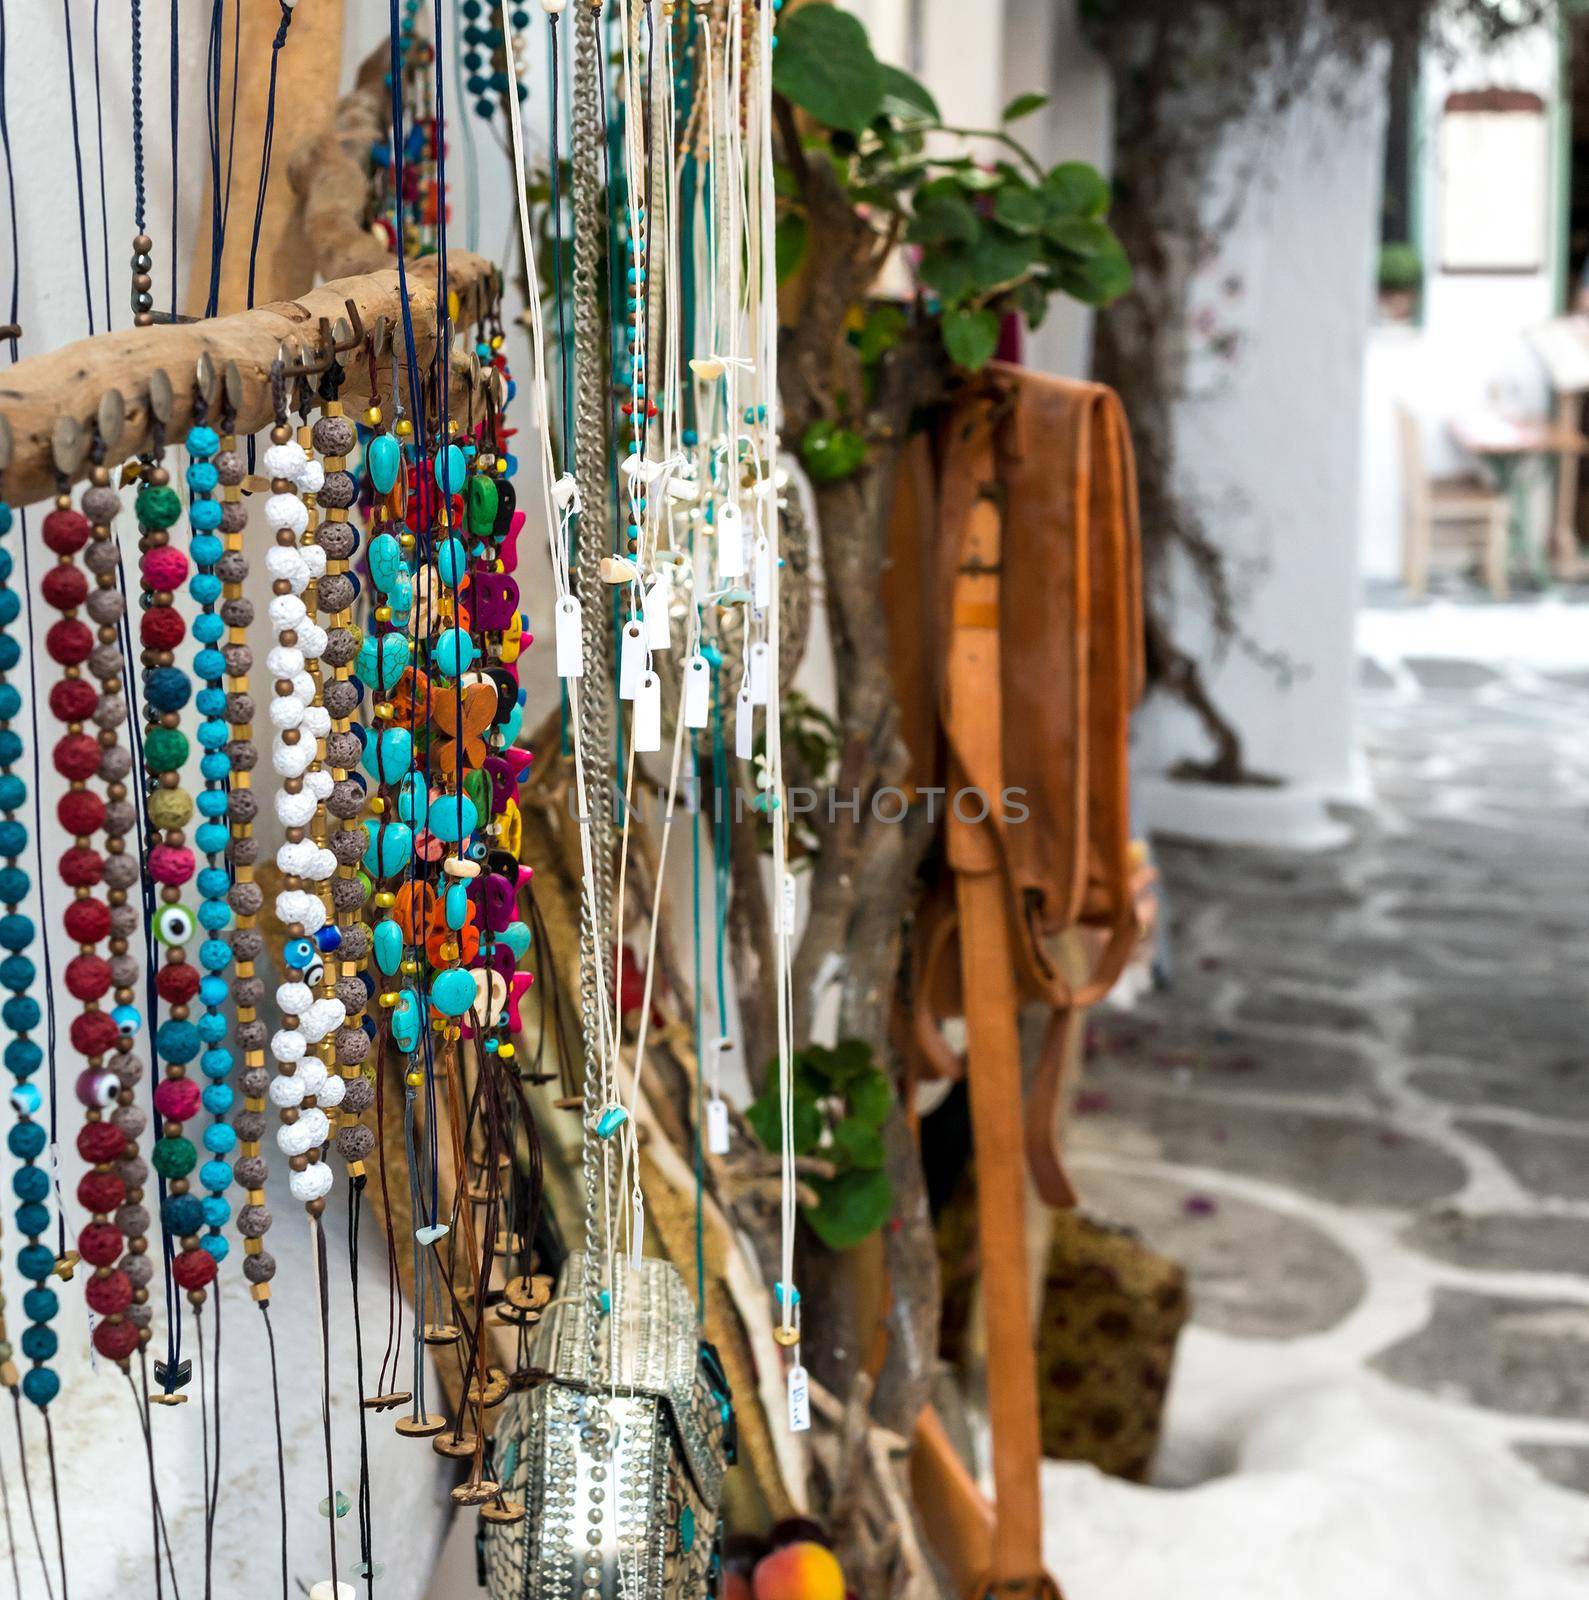 Colorful vintage jewelry necklaces and accessories at the street souvenir market in Greece